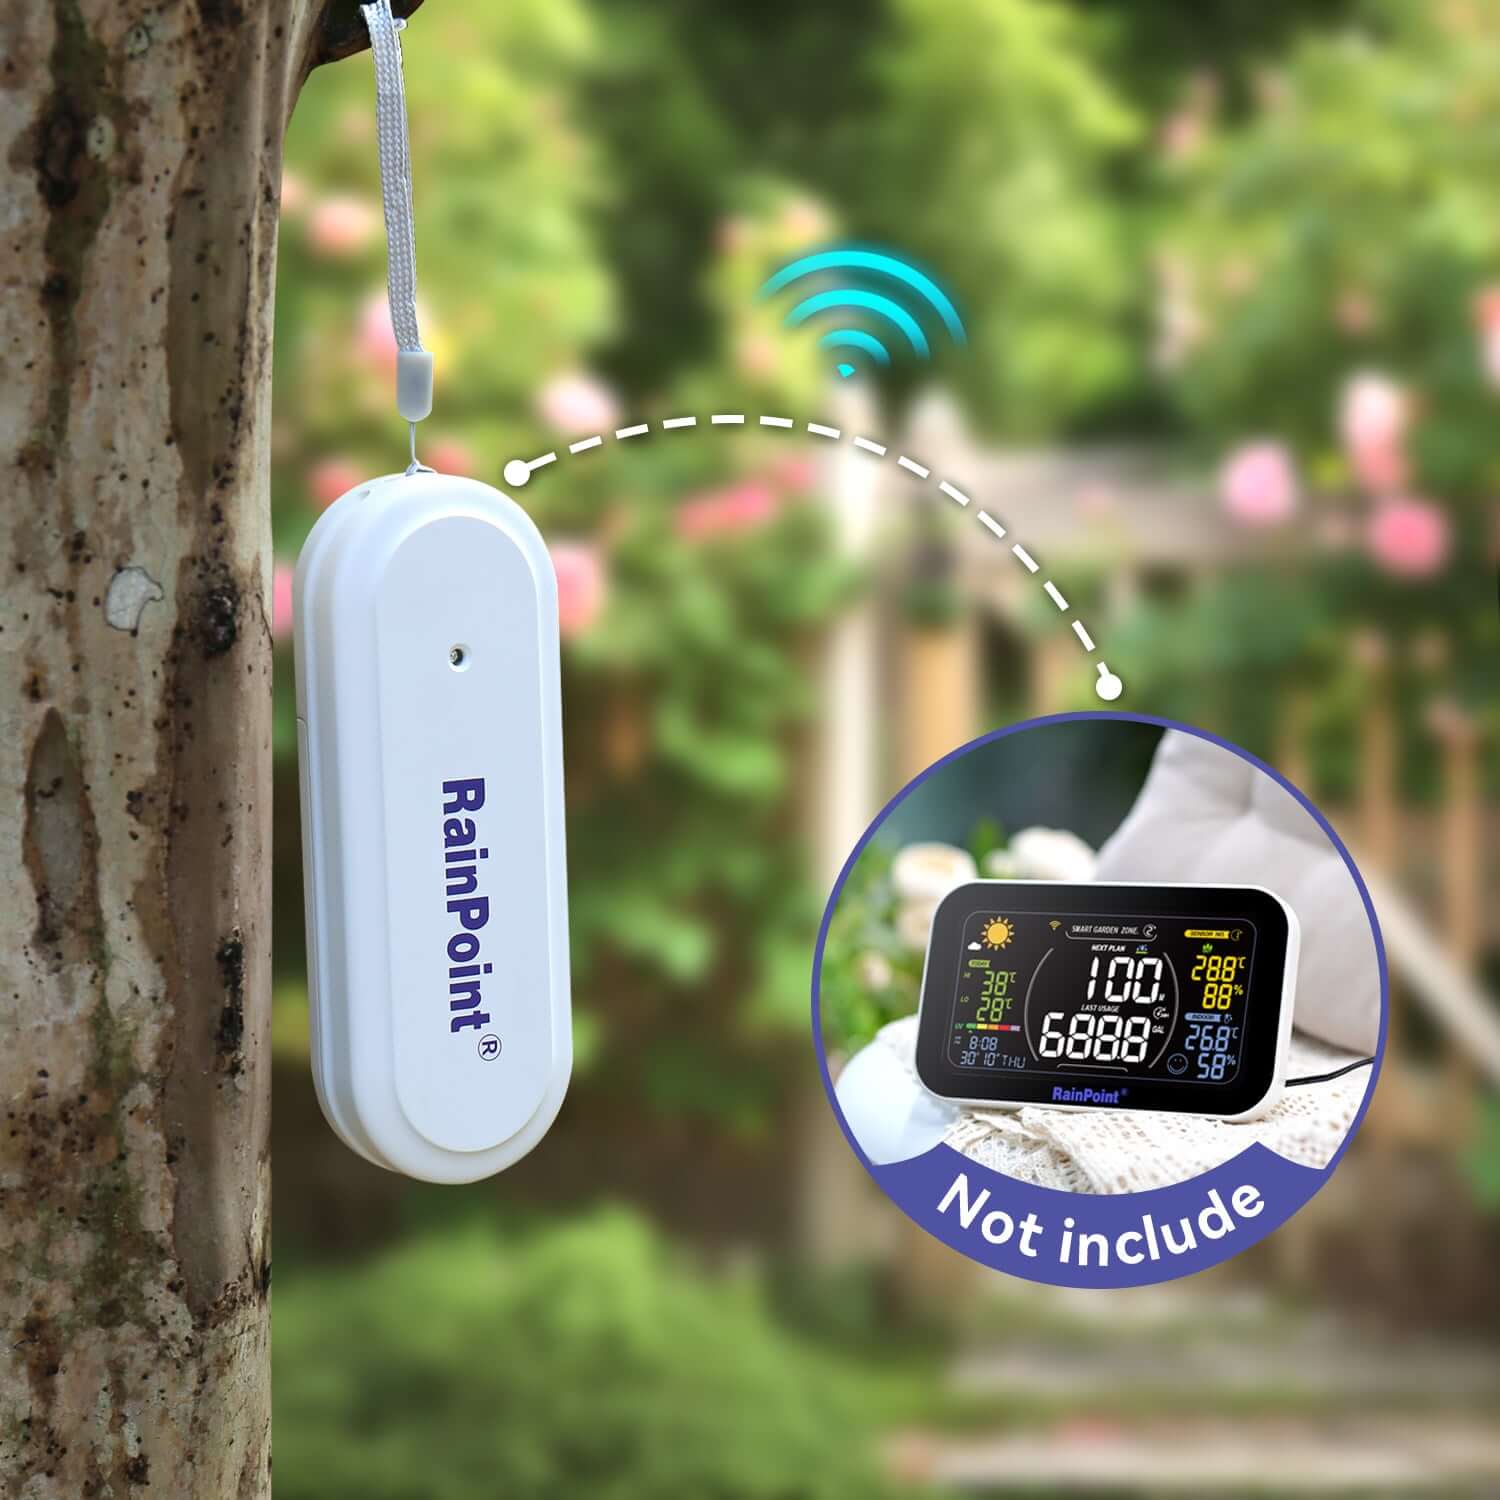 Outdoor Air Humidity Sensor- Requires to Connect Rainpoint WiFi Hub